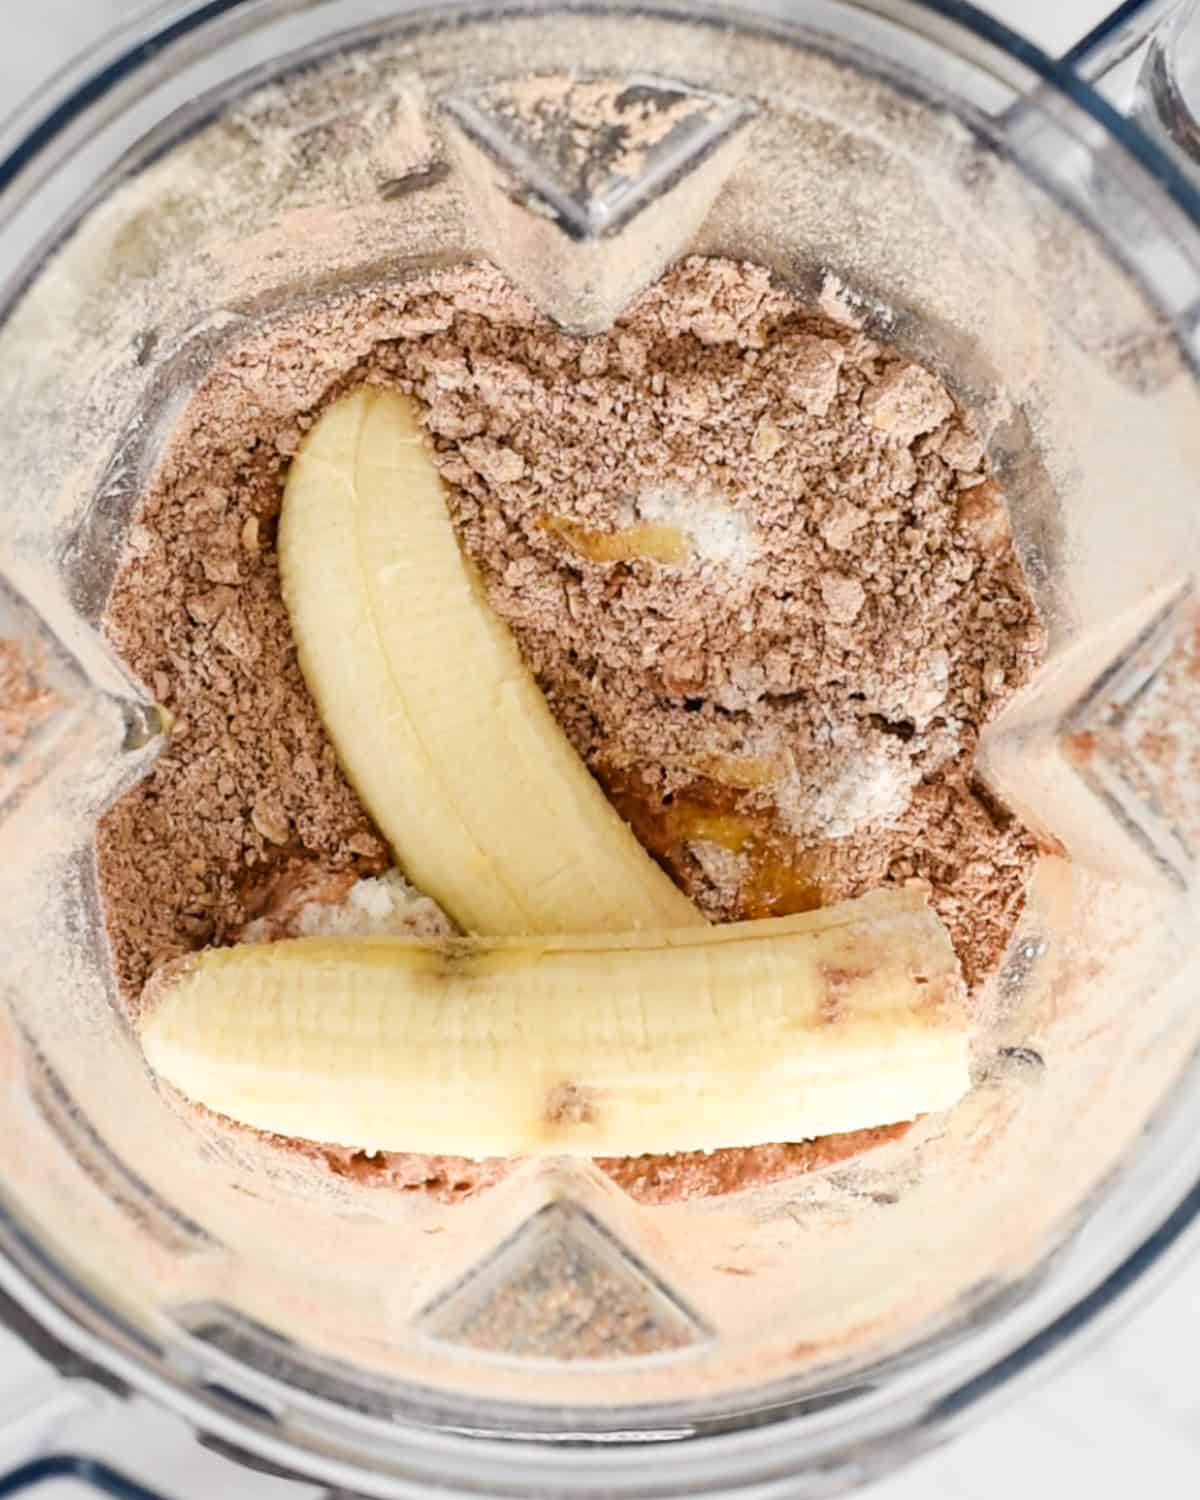 wet ingredients added to blending container before blending to make Healthy Chocolate Pancakes 